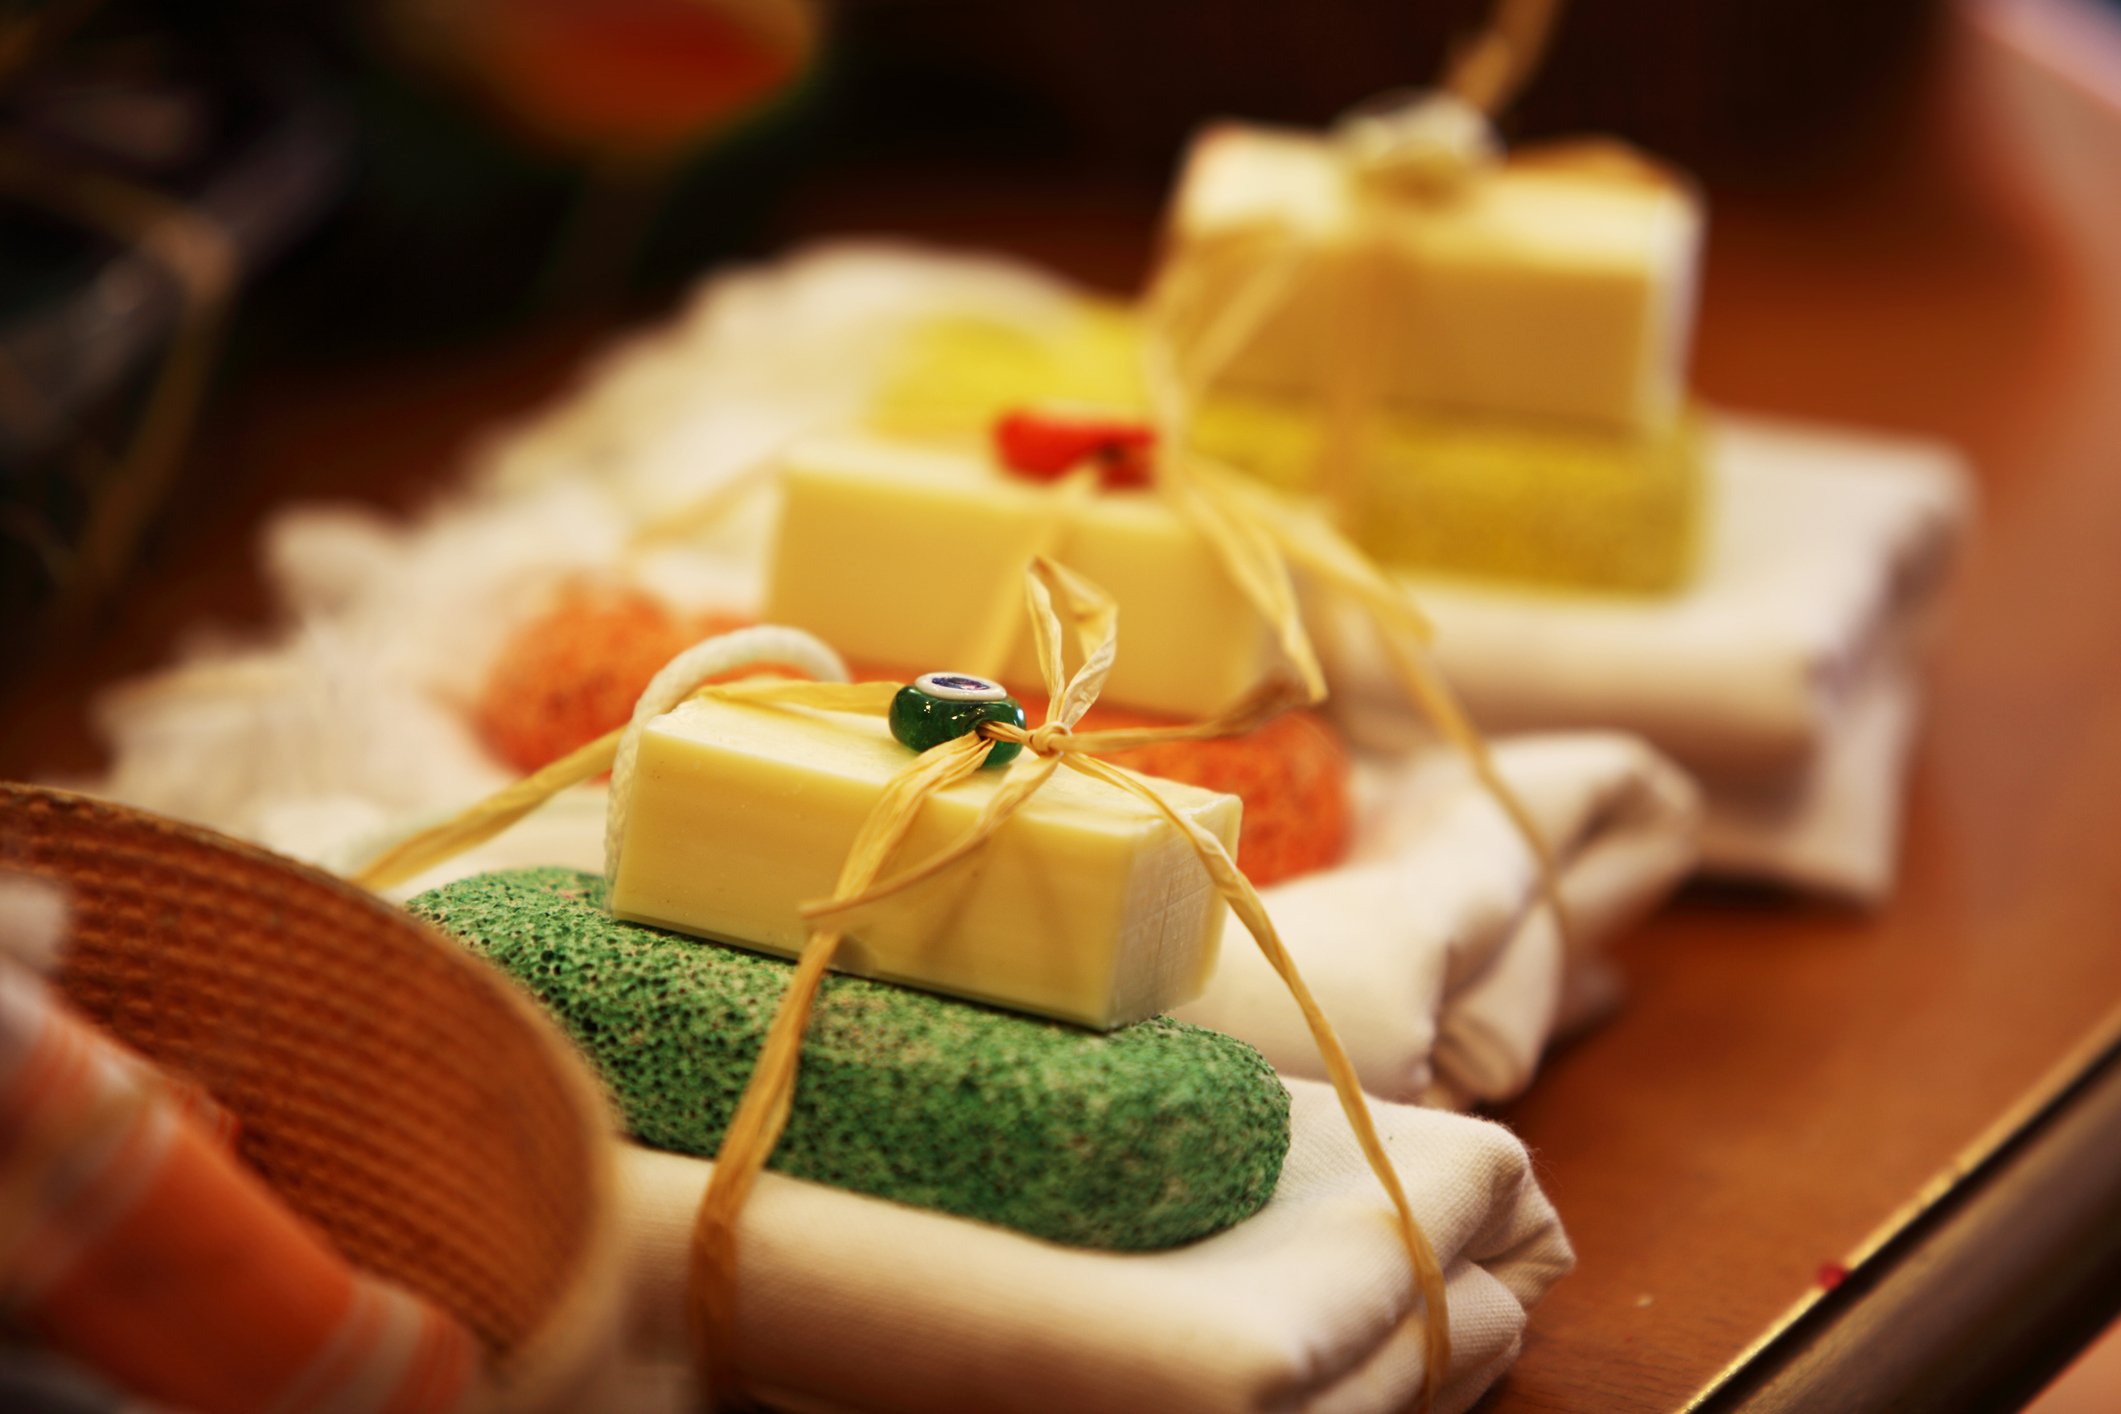 In Turkish beauty culture, natural soap made from olive oil and other essential oils are of great importance. (iStock Photo)